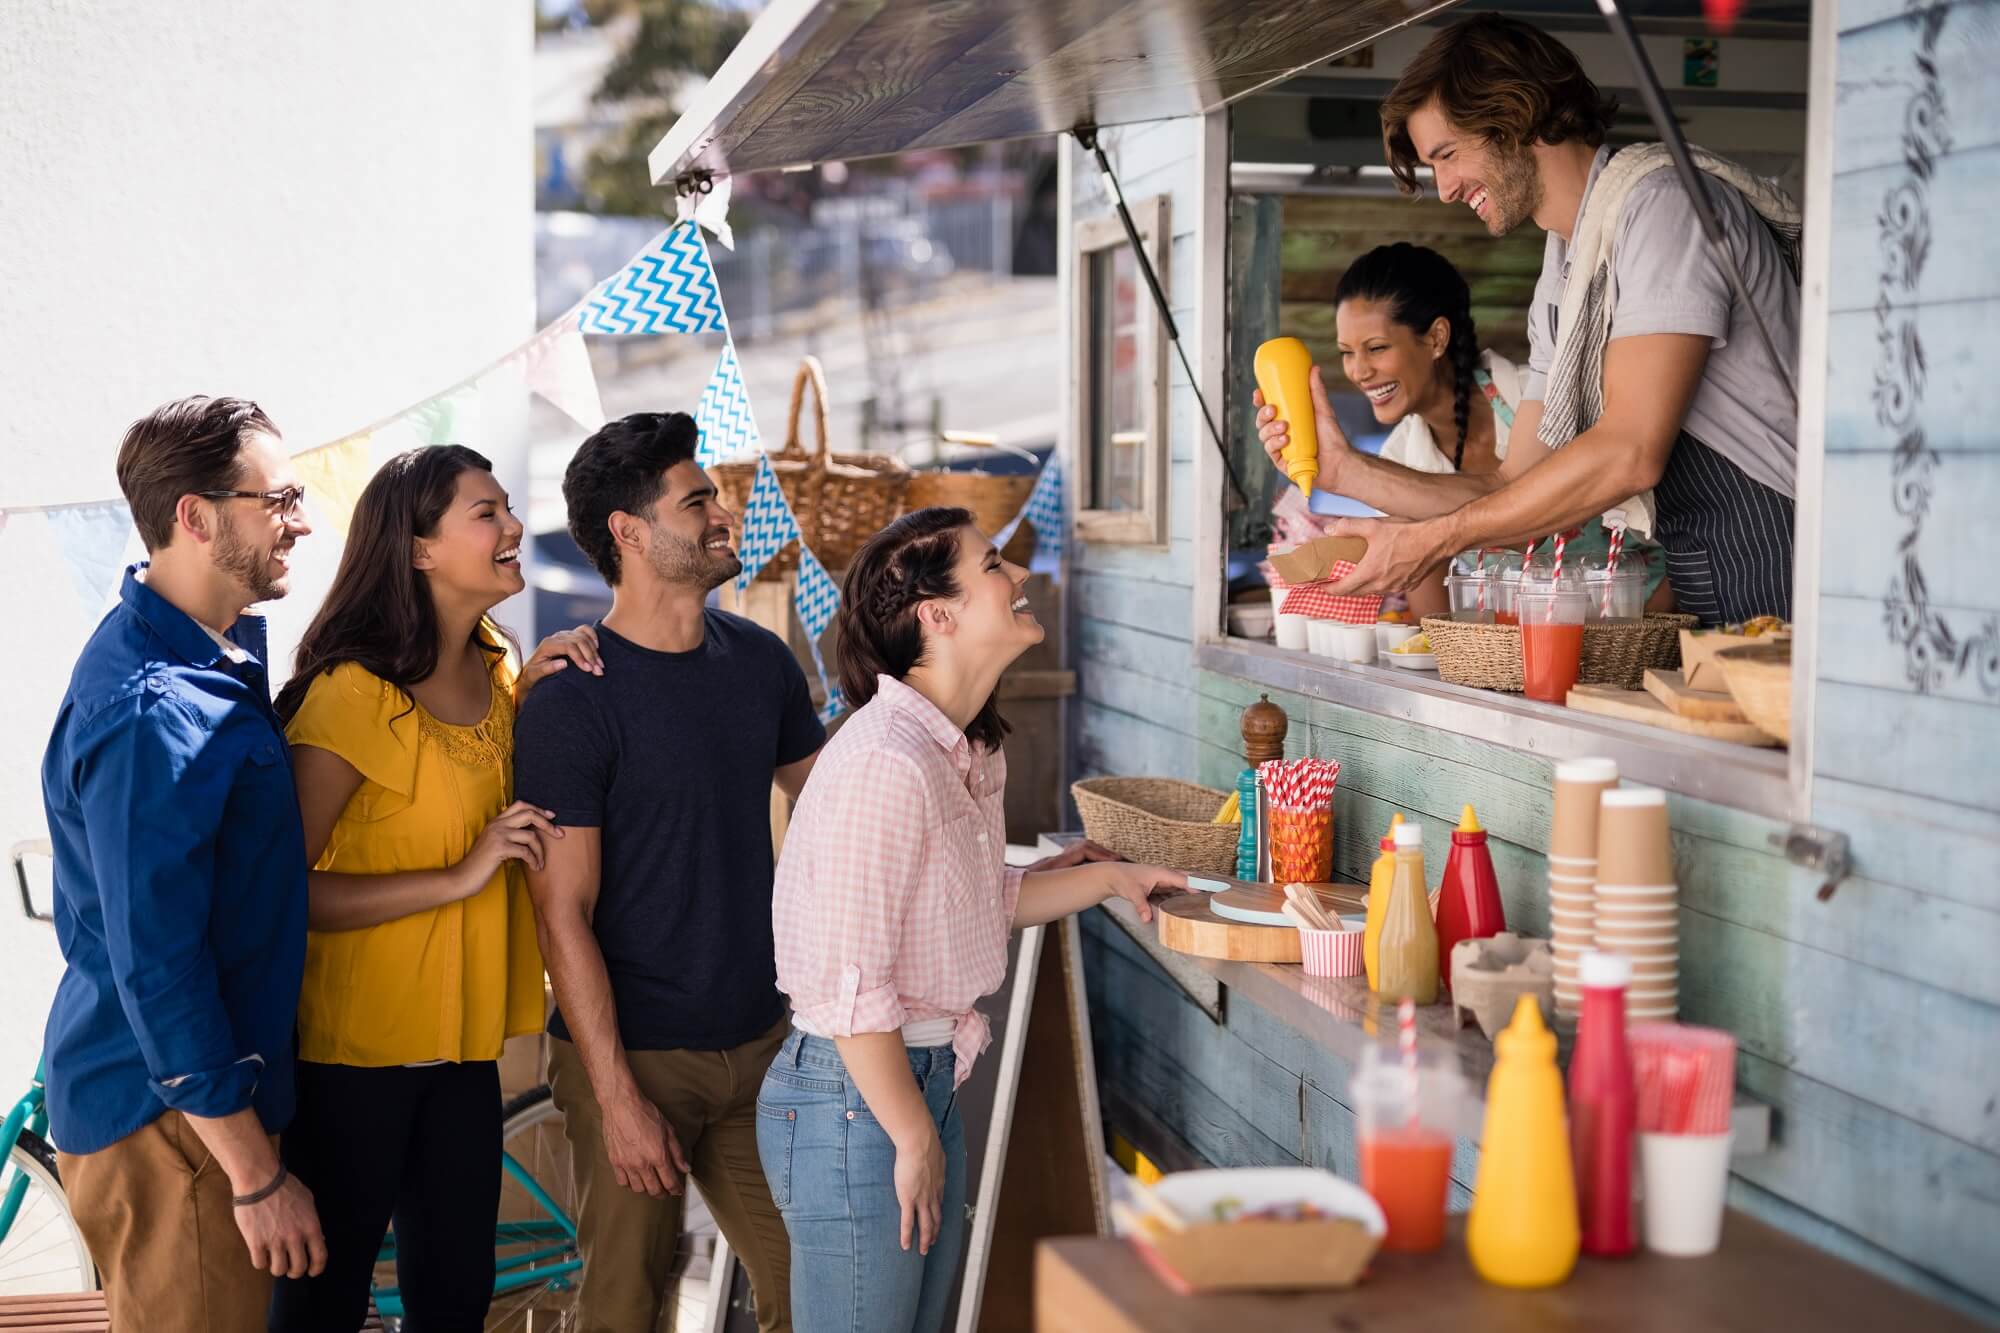 Smiling waiter serving customers at counter in food truck 